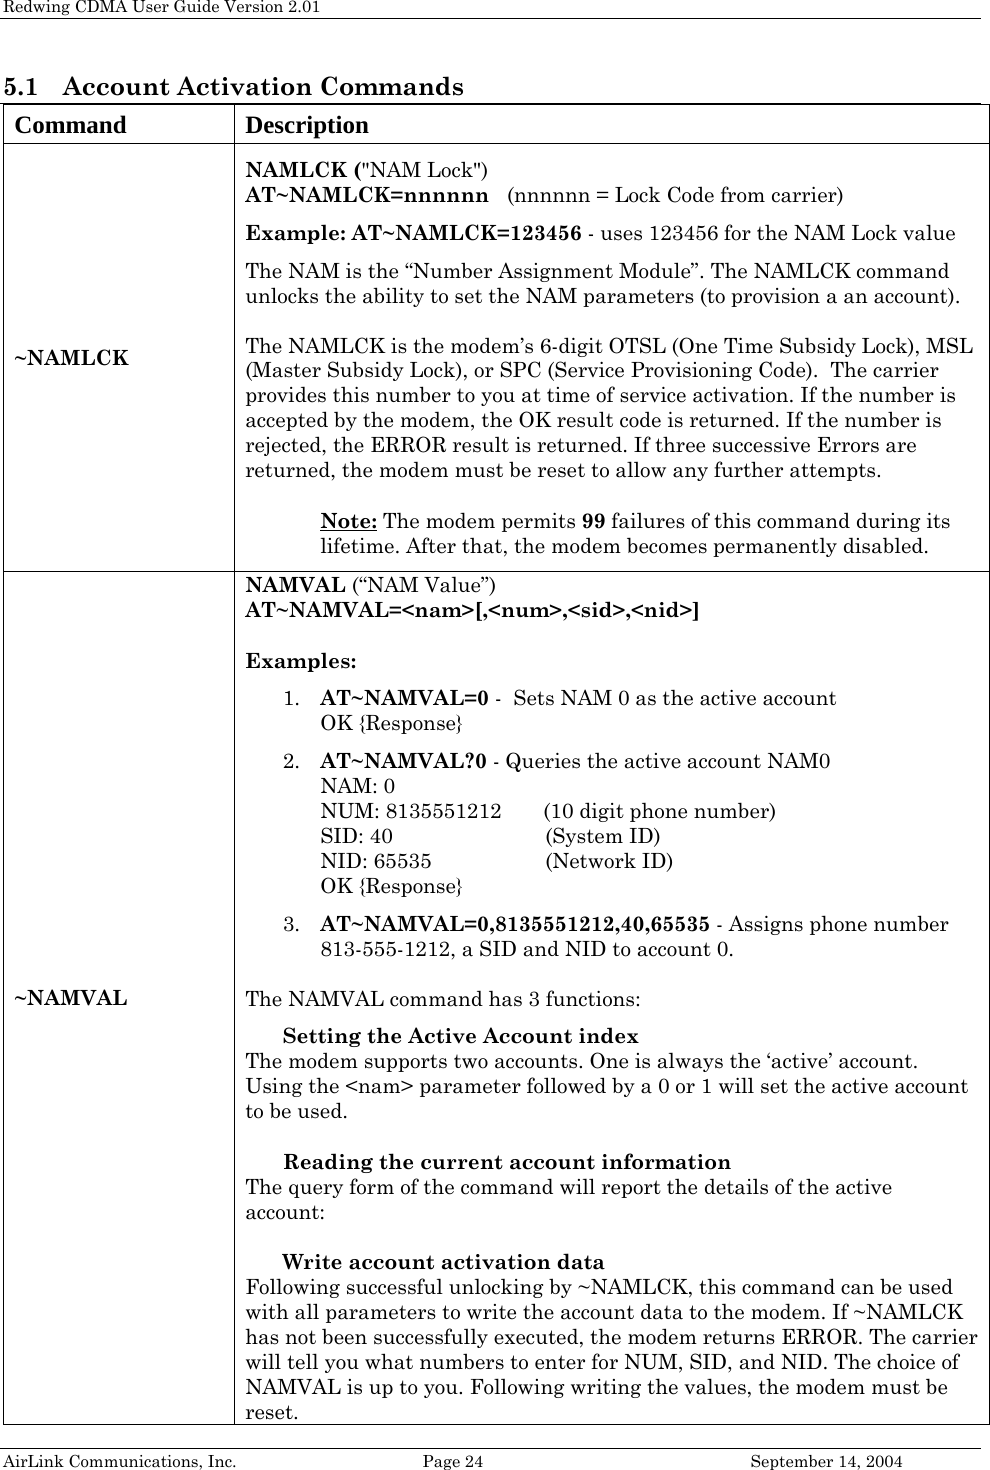 Redwing CDMA User Guide Version 2.01 AirLink Communications, Inc.  Page 24  September 14, 2004 5.1 Account Activation Commands Command Description ~NAMLCK NAMLCK (&quot;NAM Lock&quot;) AT~NAMLCK=nnnnnn   (nnnnnn = Lock Code from carrier) Example: AT~NAMLCK=123456 - uses 123456 for the NAM Lock value The NAM is the “Number Assignment Module”. The NAMLCK command unlocks the ability to set the NAM parameters (to provision a an account).  The NAMLCK is the modem’s 6-digit OTSL (One Time Subsidy Lock), MSL (Master Subsidy Lock), or SPC (Service Provisioning Code).  The carrier provides this number to you at time of service activation. If the number is accepted by the modem, the OK result code is returned. If the number is rejected, the ERROR result is returned. If three successive Errors are returned, the modem must be reset to allow any further attempts.  Note: The modem permits 99 failures of this command during its lifetime. After that, the modem becomes permanently disabled. ~NAMVAL NAMVAL (“NAM Value”)  AT~NAMVAL=&lt;nam&gt;[,&lt;num&gt;,&lt;sid&gt;,&lt;nid&gt;]  Examples: 1. AT~NAMVAL=0 -  Sets NAM 0 as the active account  OK {Response} 2. AT~NAMVAL?0 - Queries the active account NAM0 NAM: 0 NUM: 8135551212    (10 digit phone number) SID: 40   (System ID) NID: 65535    (Network ID) OK {Response} 3. AT~NAMVAL=0,8135551212,40,65535 - Assigns phone number 813-555-1212, a SID and NID to account 0.  The NAMVAL command has 3 functions: Setting the Active Account index  The modem supports two accounts. One is always the ‘active’ account. Using the &lt;nam&gt; parameter followed by a 0 or 1 will set the active account to be used.  Reading the current account information  The query form of the command will report the details of the active account:  Write account activation data  Following successful unlocking by ~NAMLCK, this command can be used with all parameters to write the account data to the modem. If ~NAMLCK has not been successfully executed, the modem returns ERROR. The carrier will tell you what numbers to enter for NUM, SID, and NID. The choice of NAMVAL is up to you. Following writing the values, the modem must be reset. 